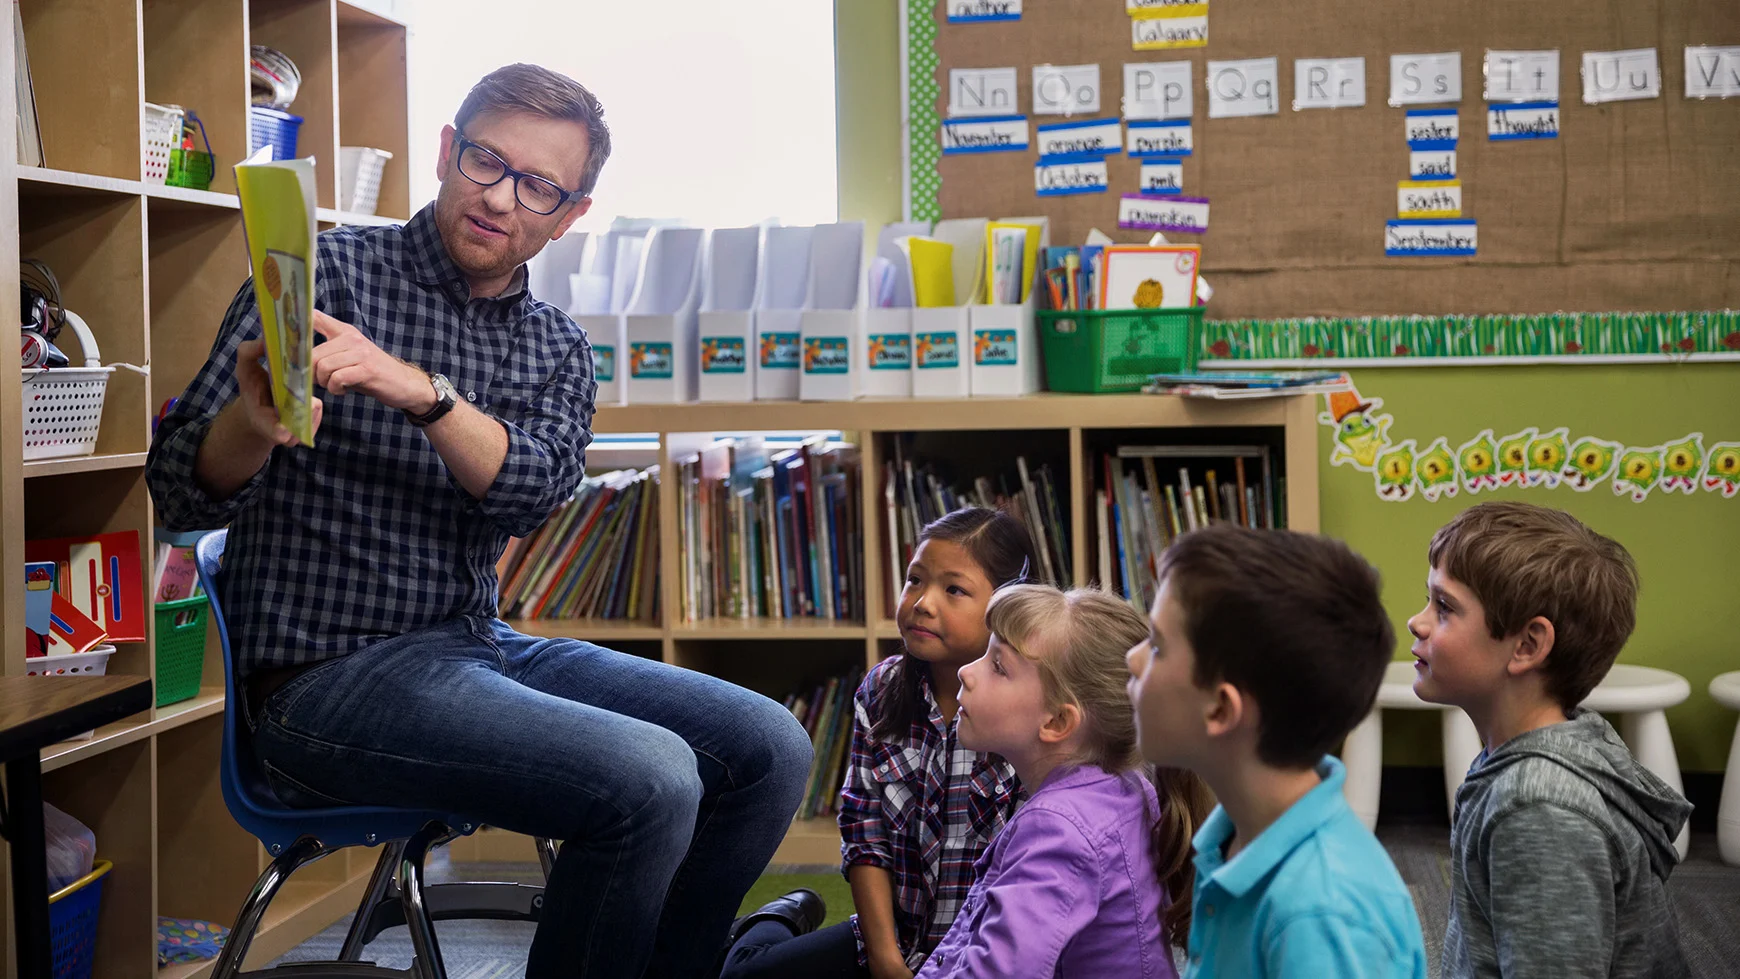 A teacher sits on a chair and holds a book, pointing at a word. The four kids sitting on the floor in the classroom watch. 